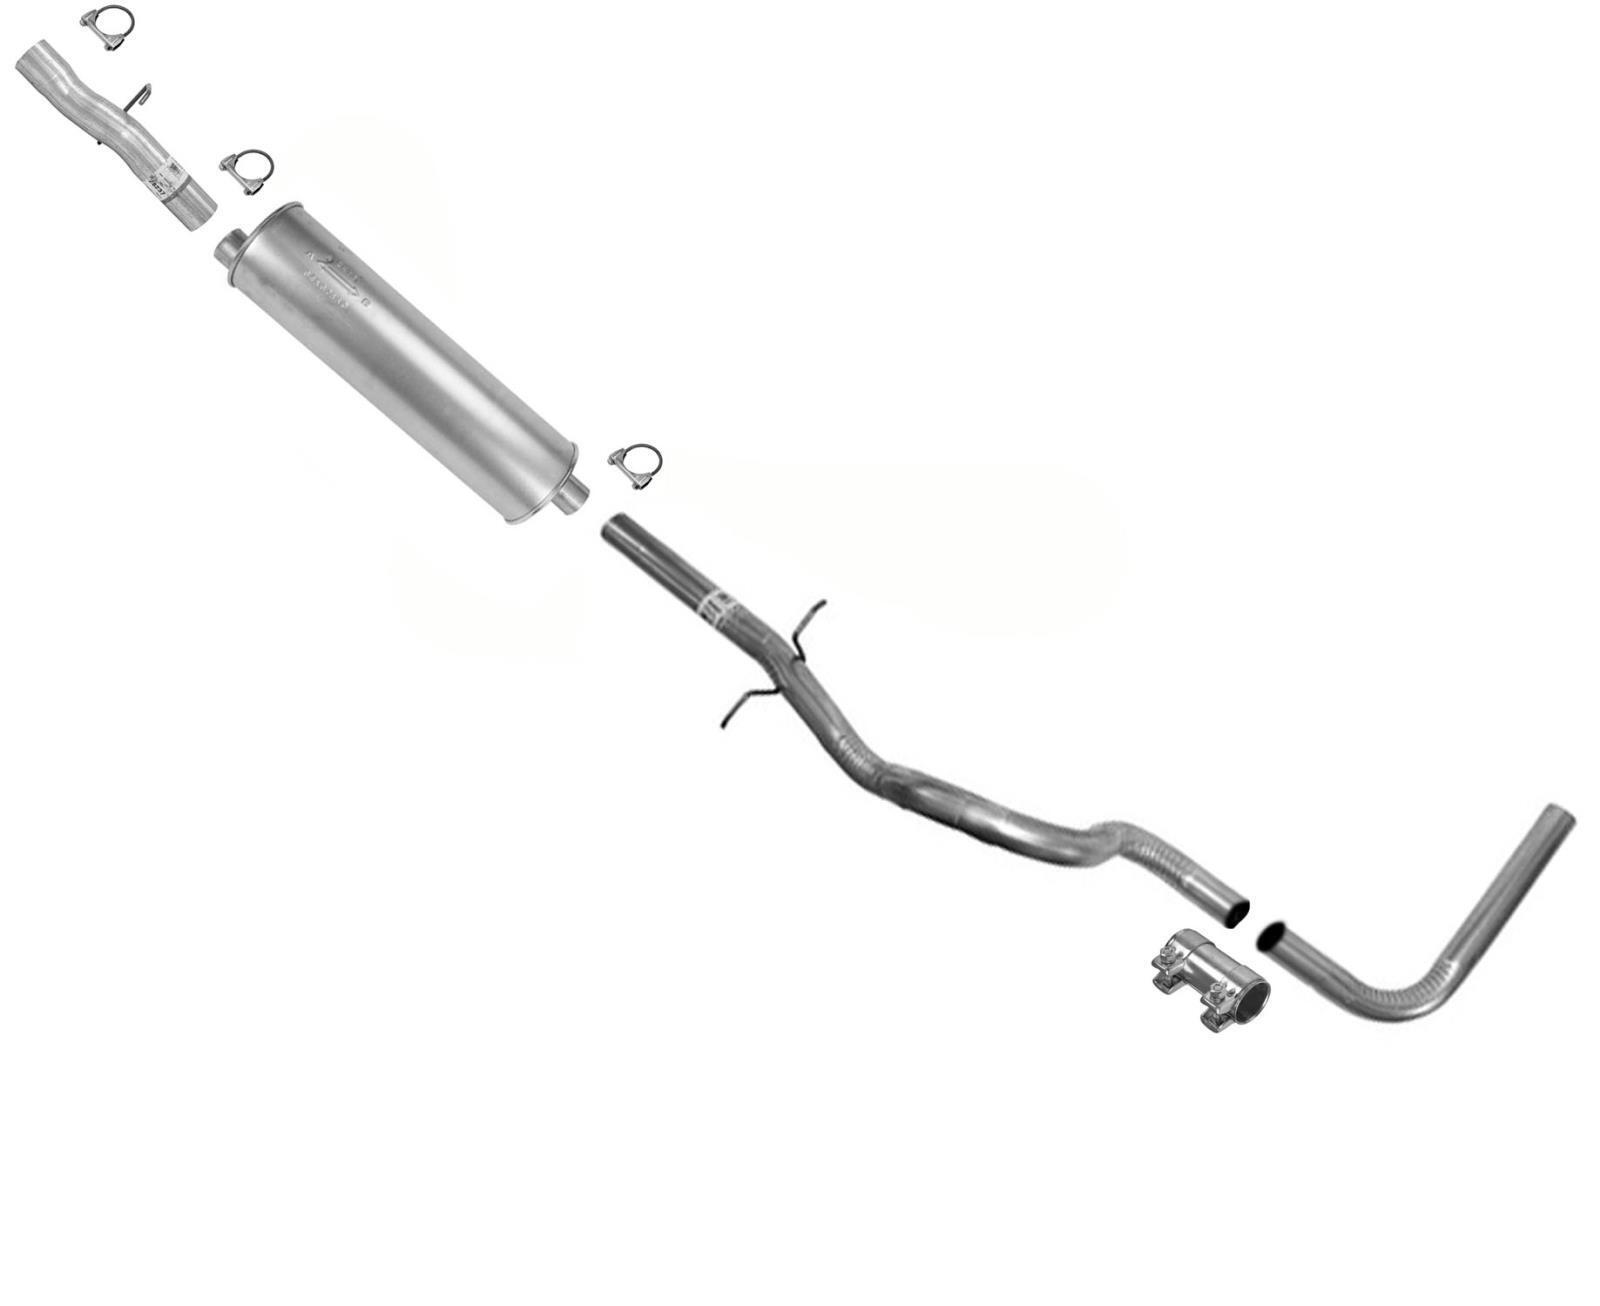 FIts 1987-1996 For Ford E150 Econoline Van 4.9 5.0L Exhaust System